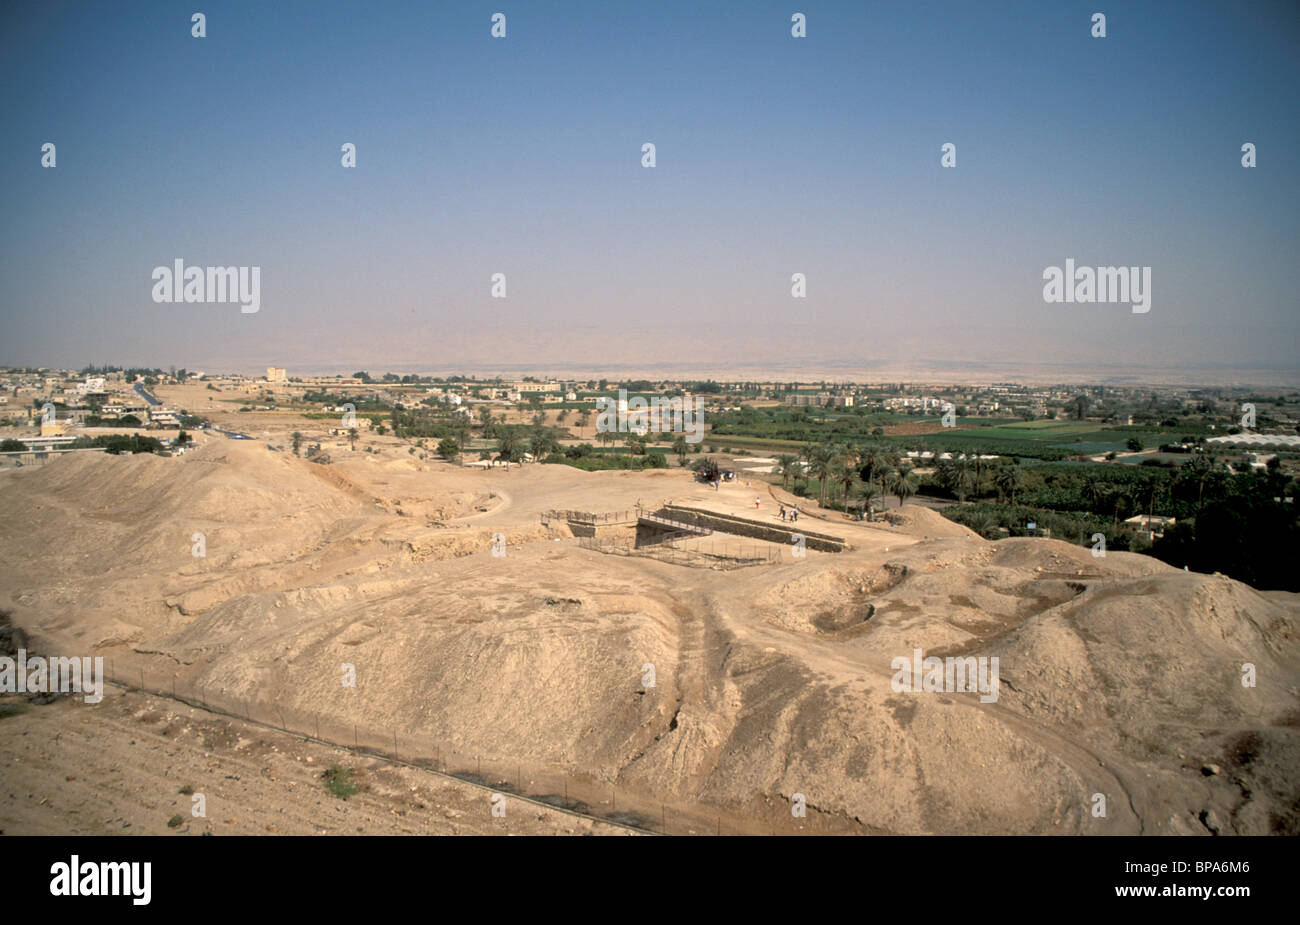 Palestinian territories, Jordan Valley, Tel Jericho or Tell es-Sultan the 'oldest city in the world' Stock Photo